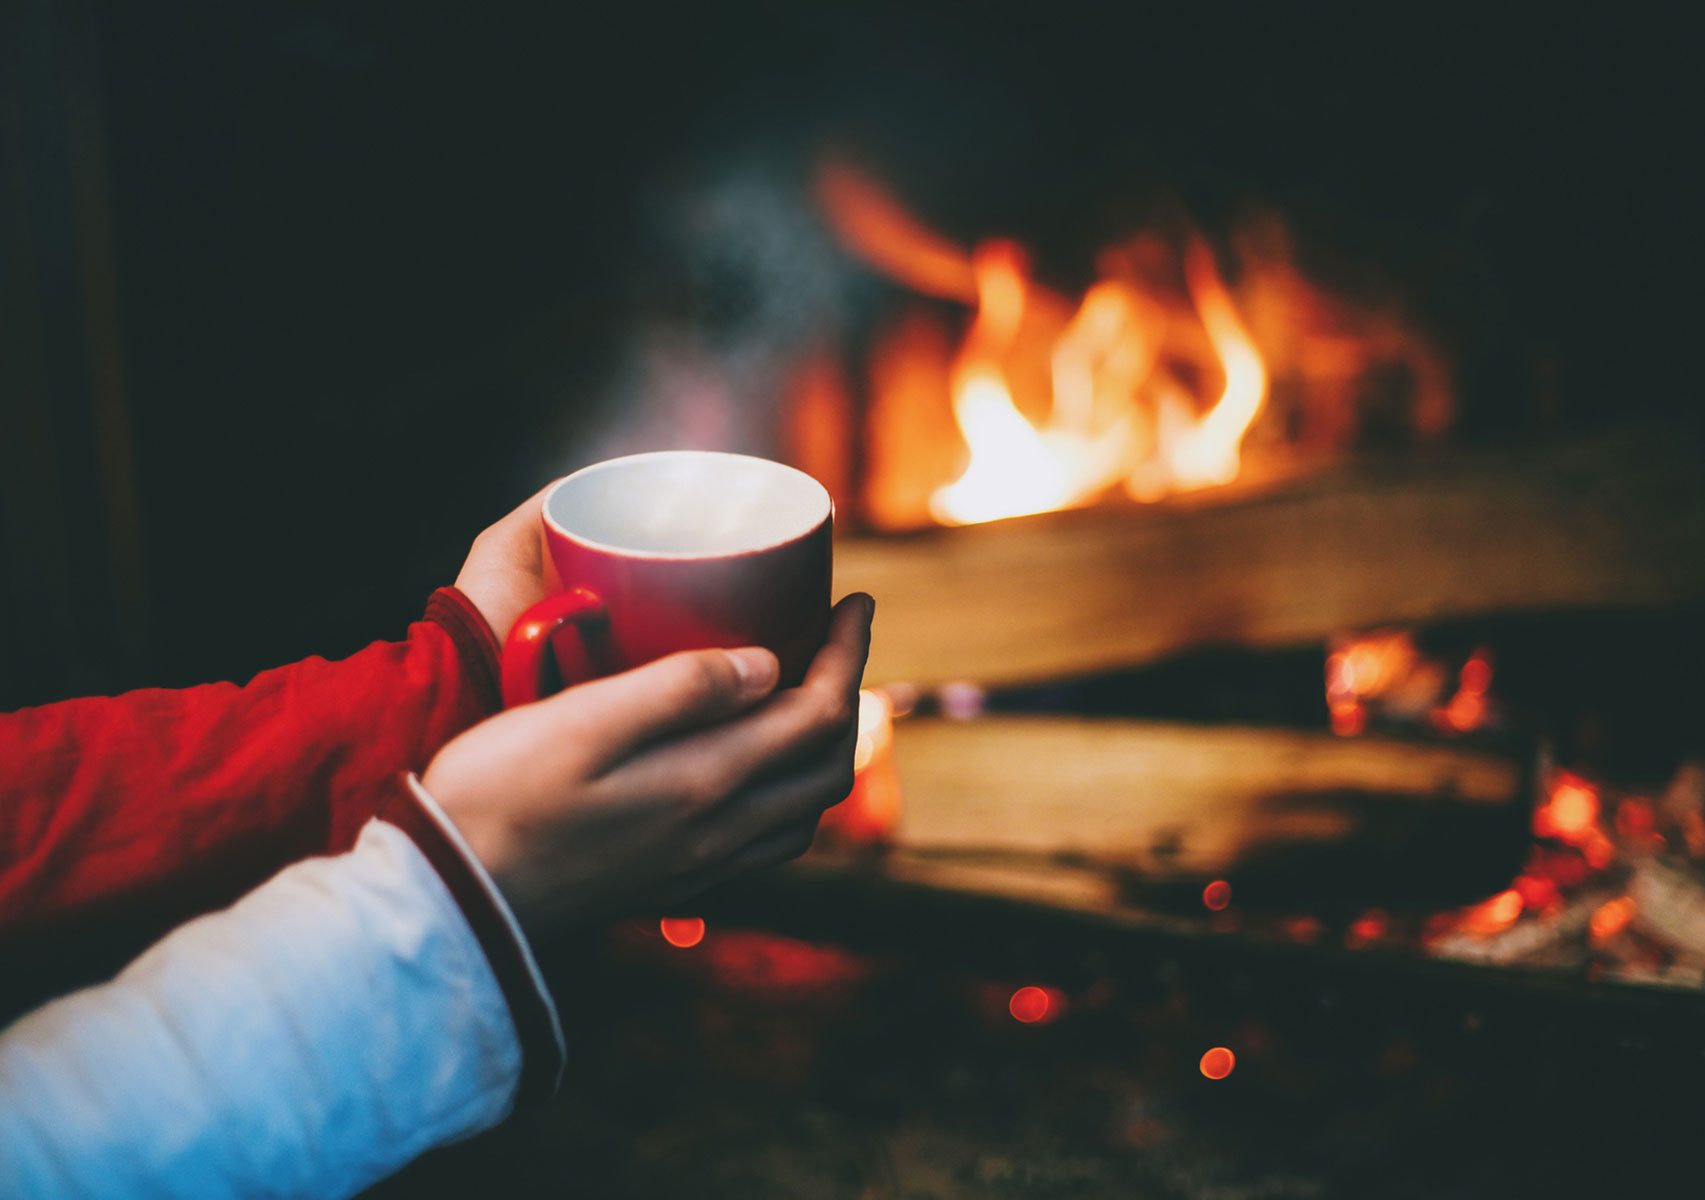 hands holding warm tea cup in front of fire